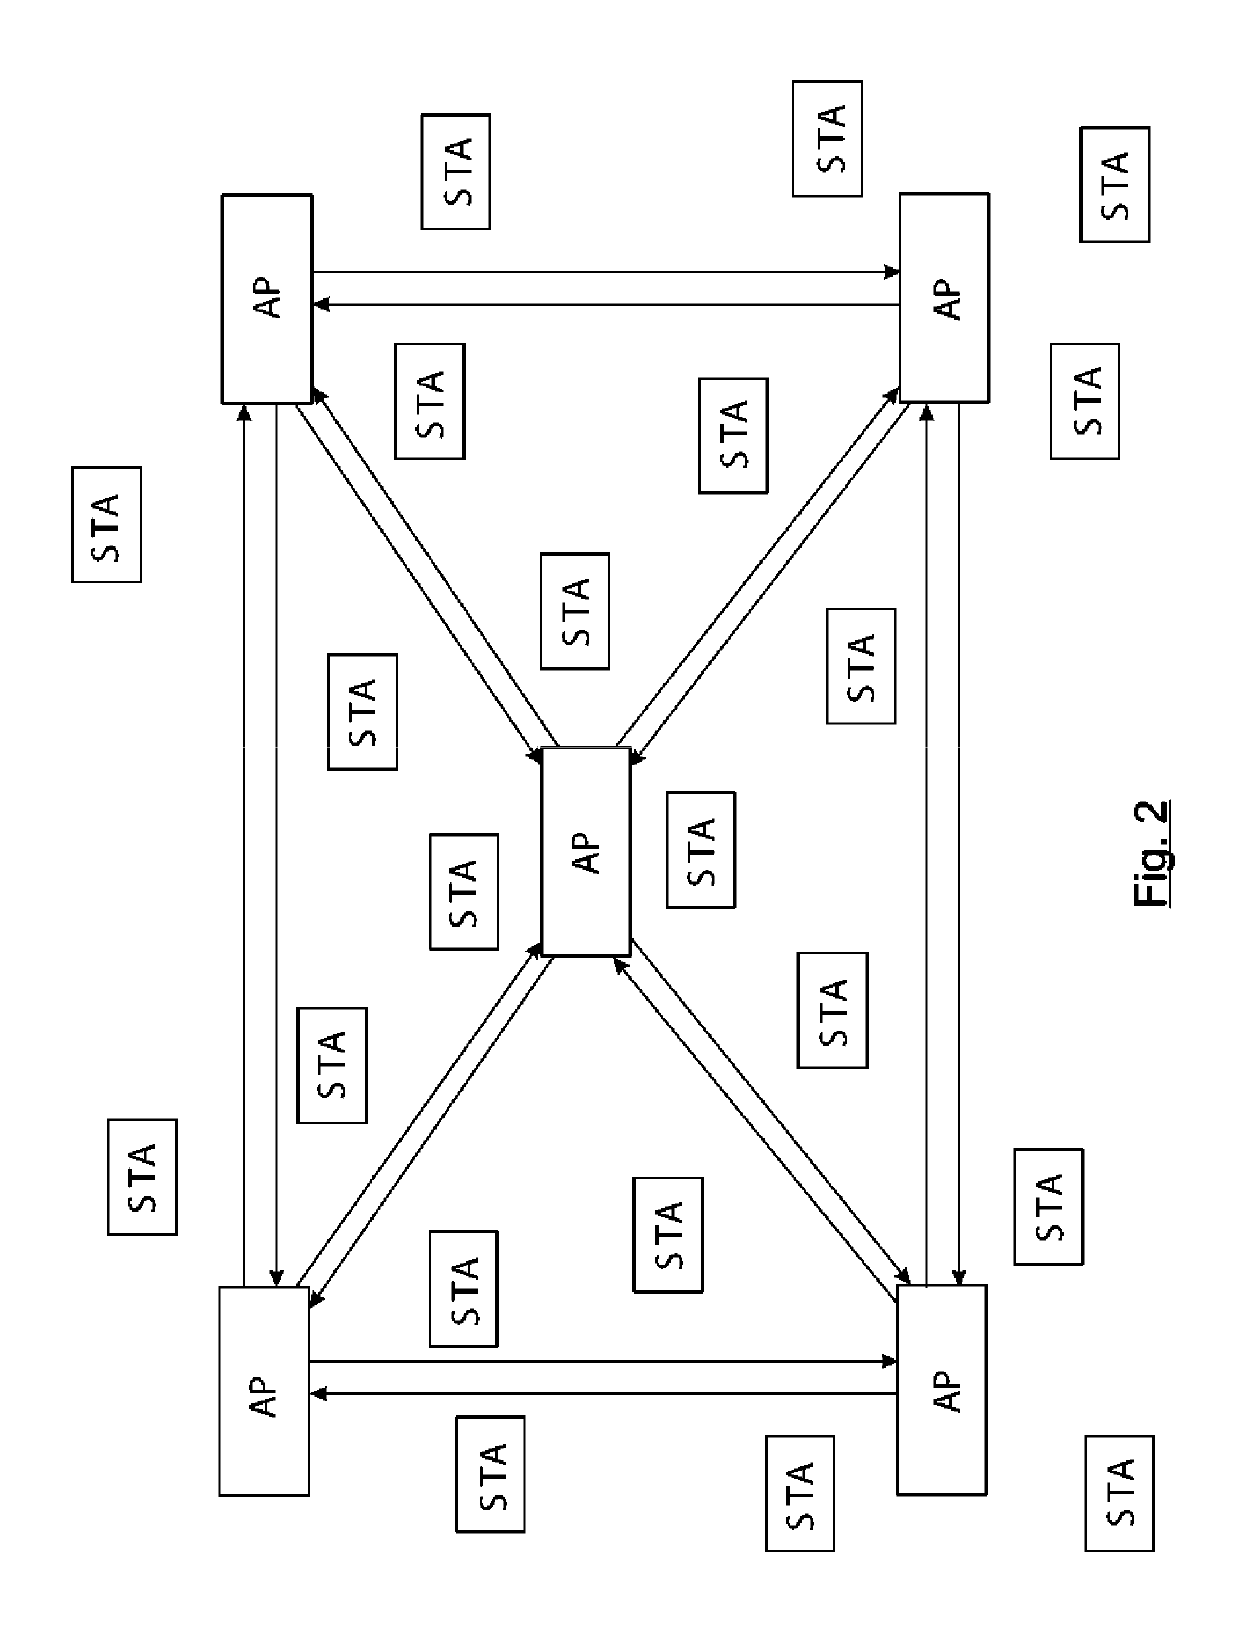 System and method for decentralized control of wireless networks